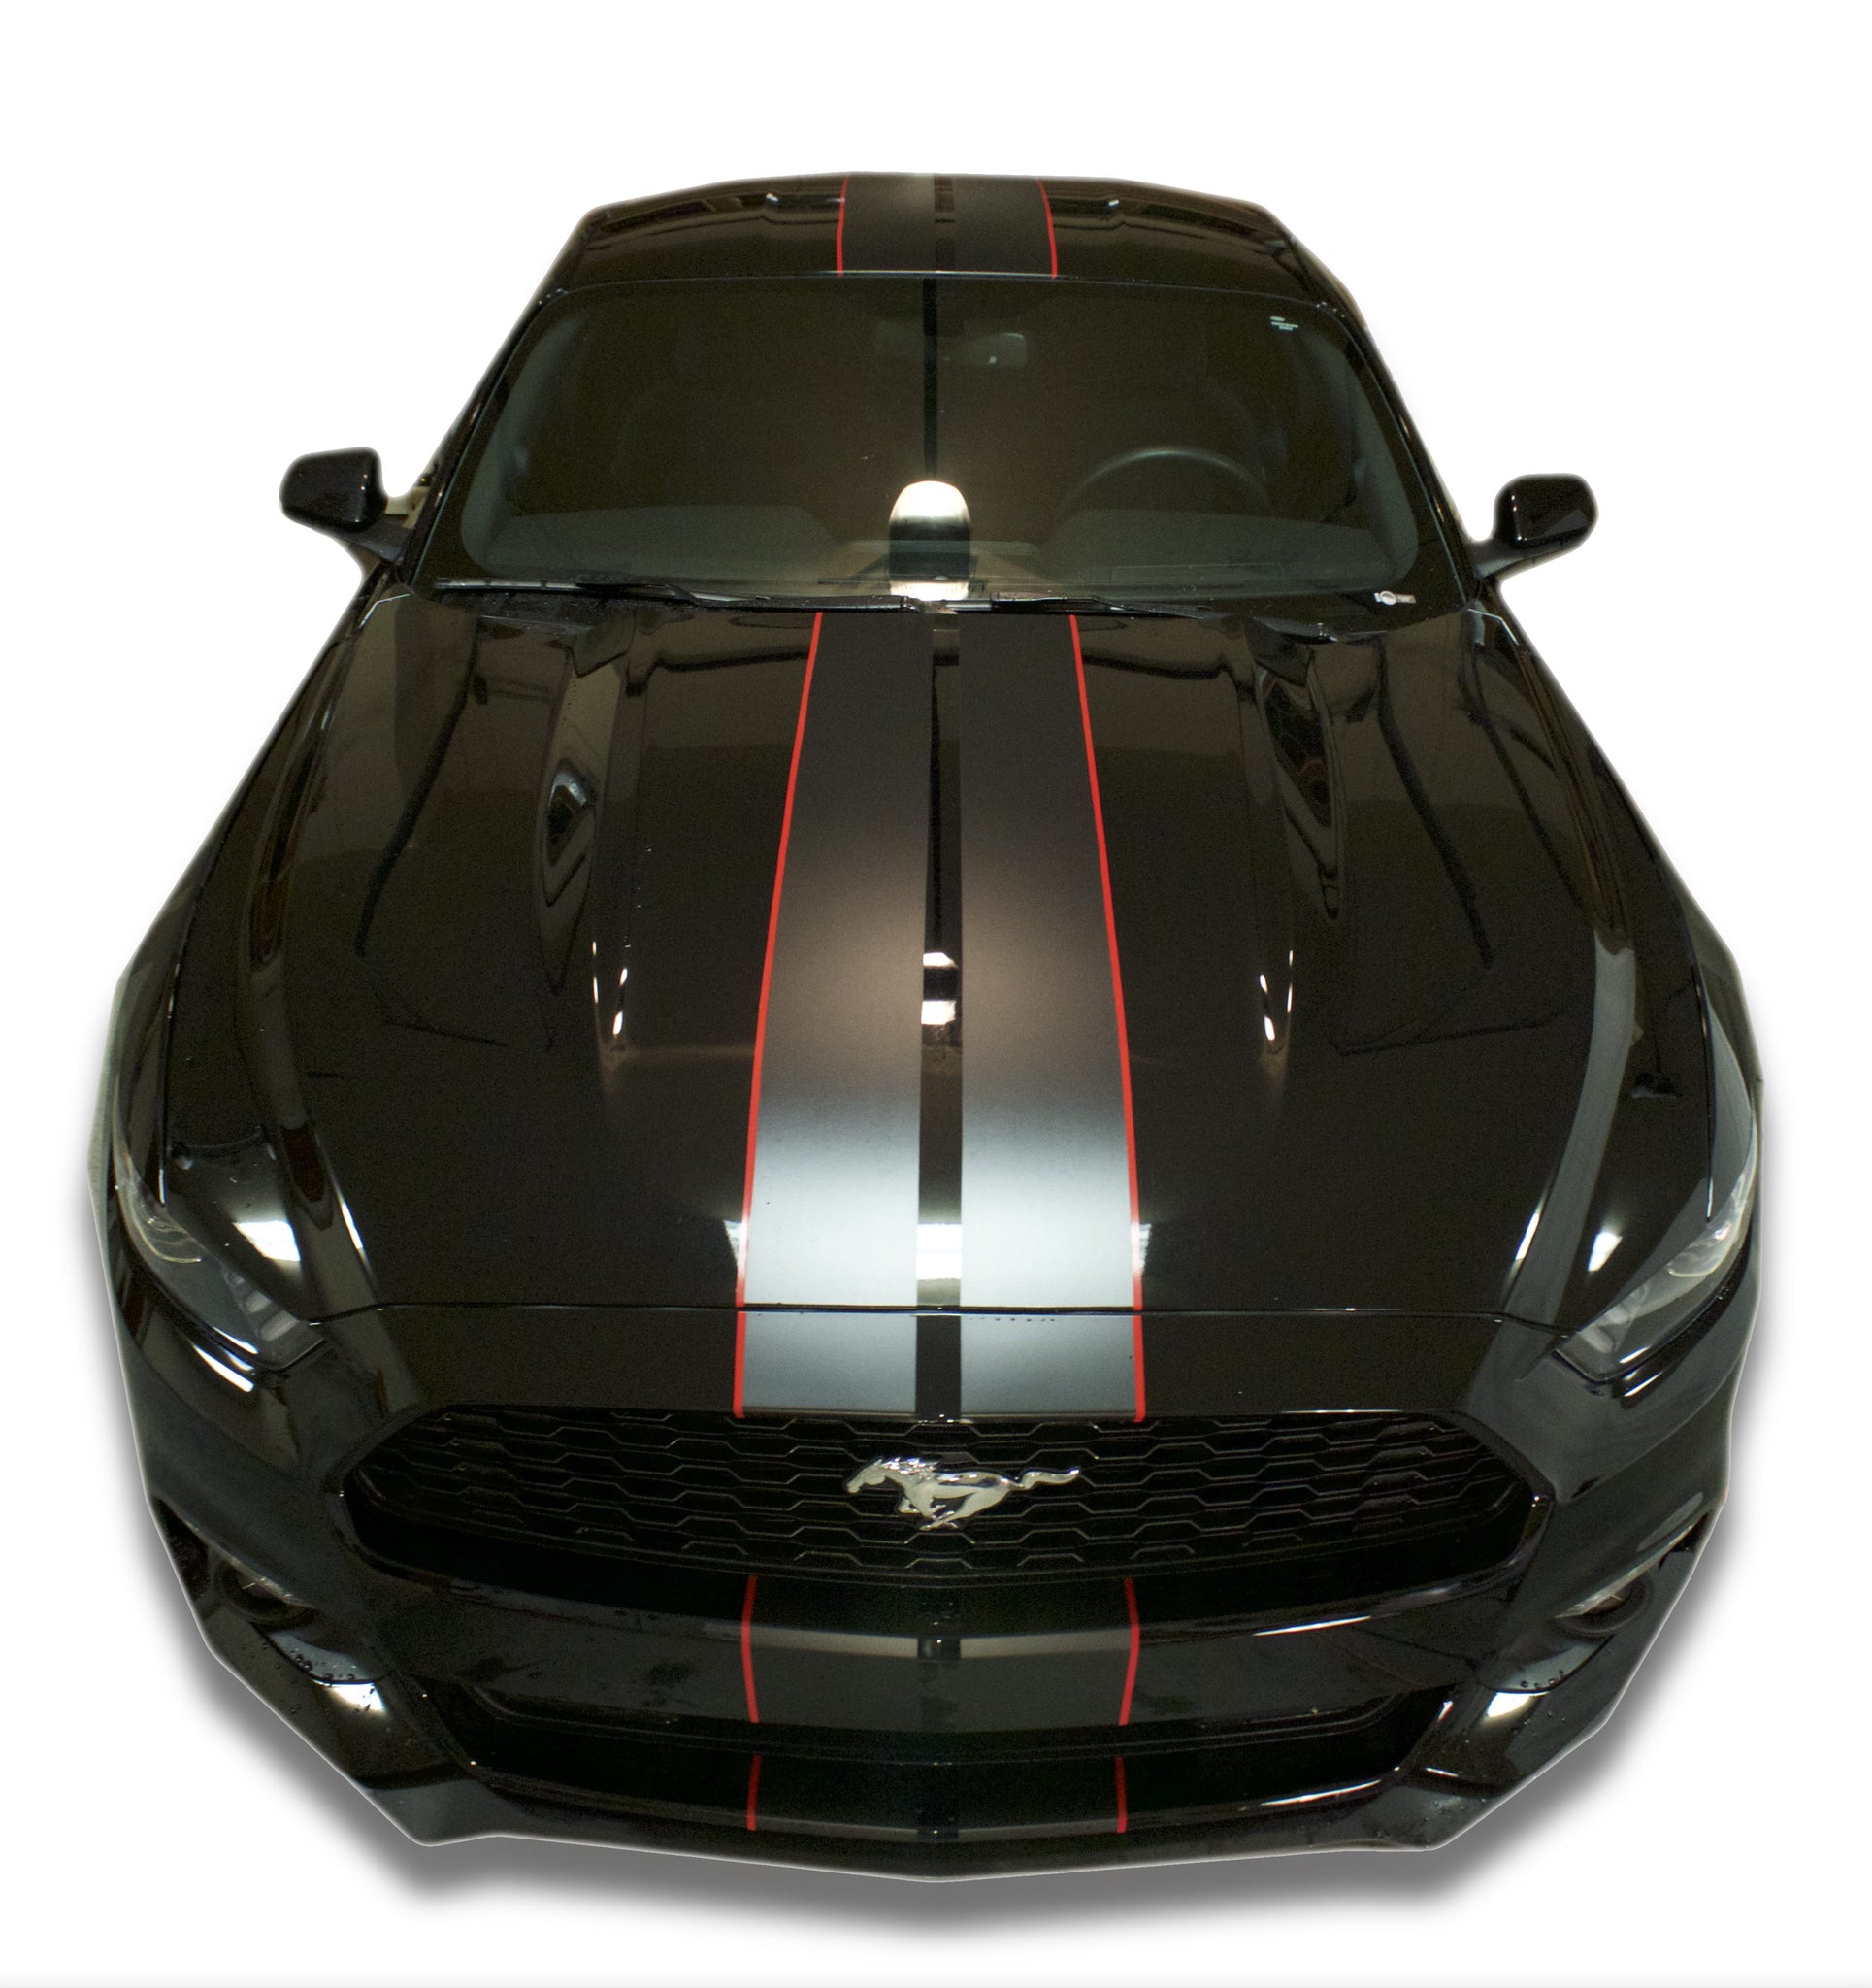 types of racing stripes on cars